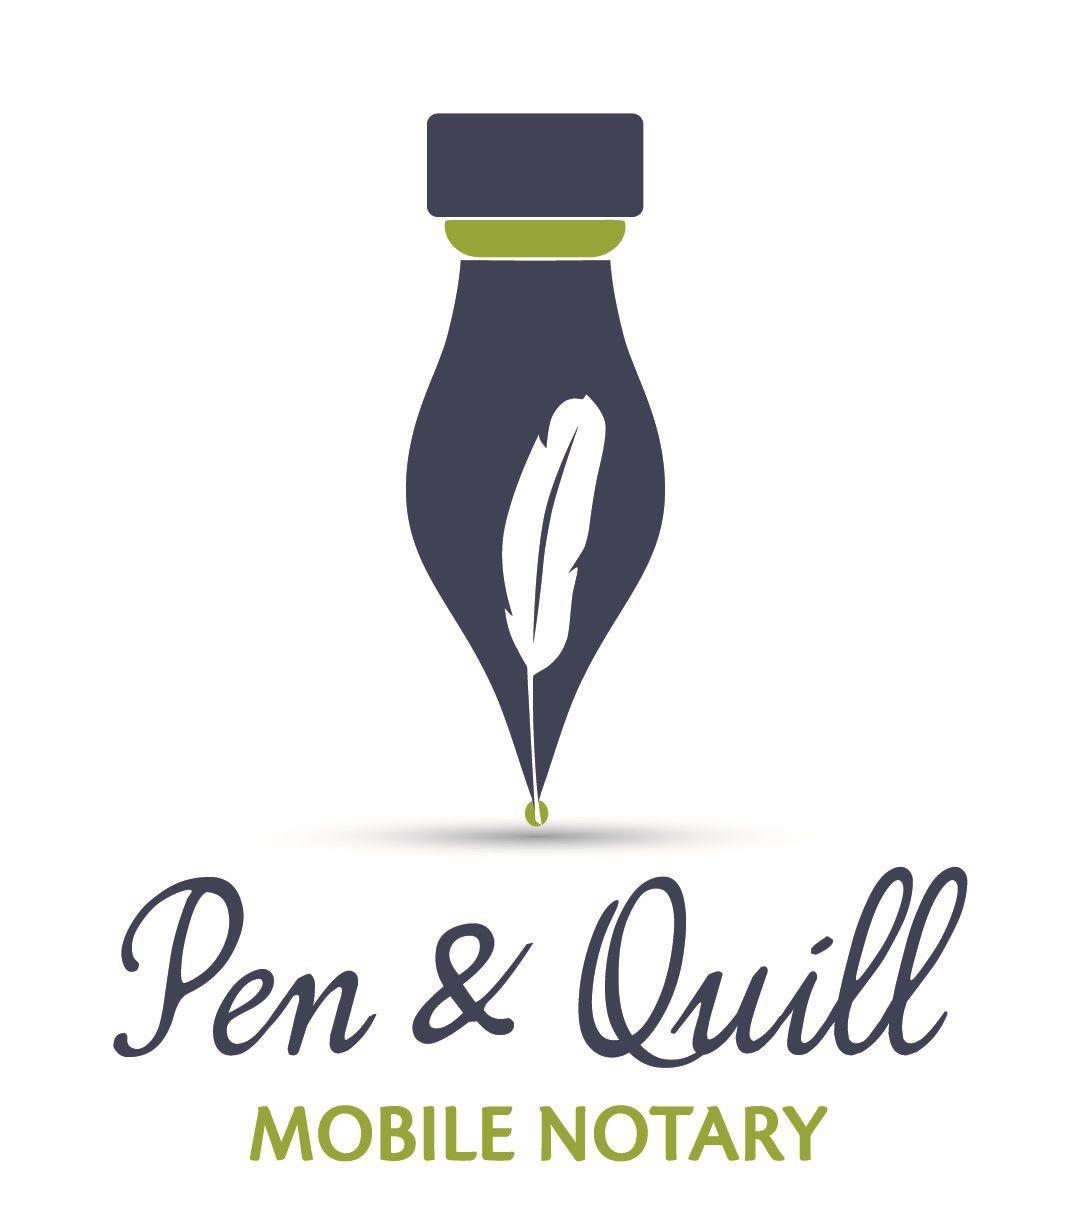 Notary Logo - Pen and Quill Logo Final - Pen and Quill Mobile Notary